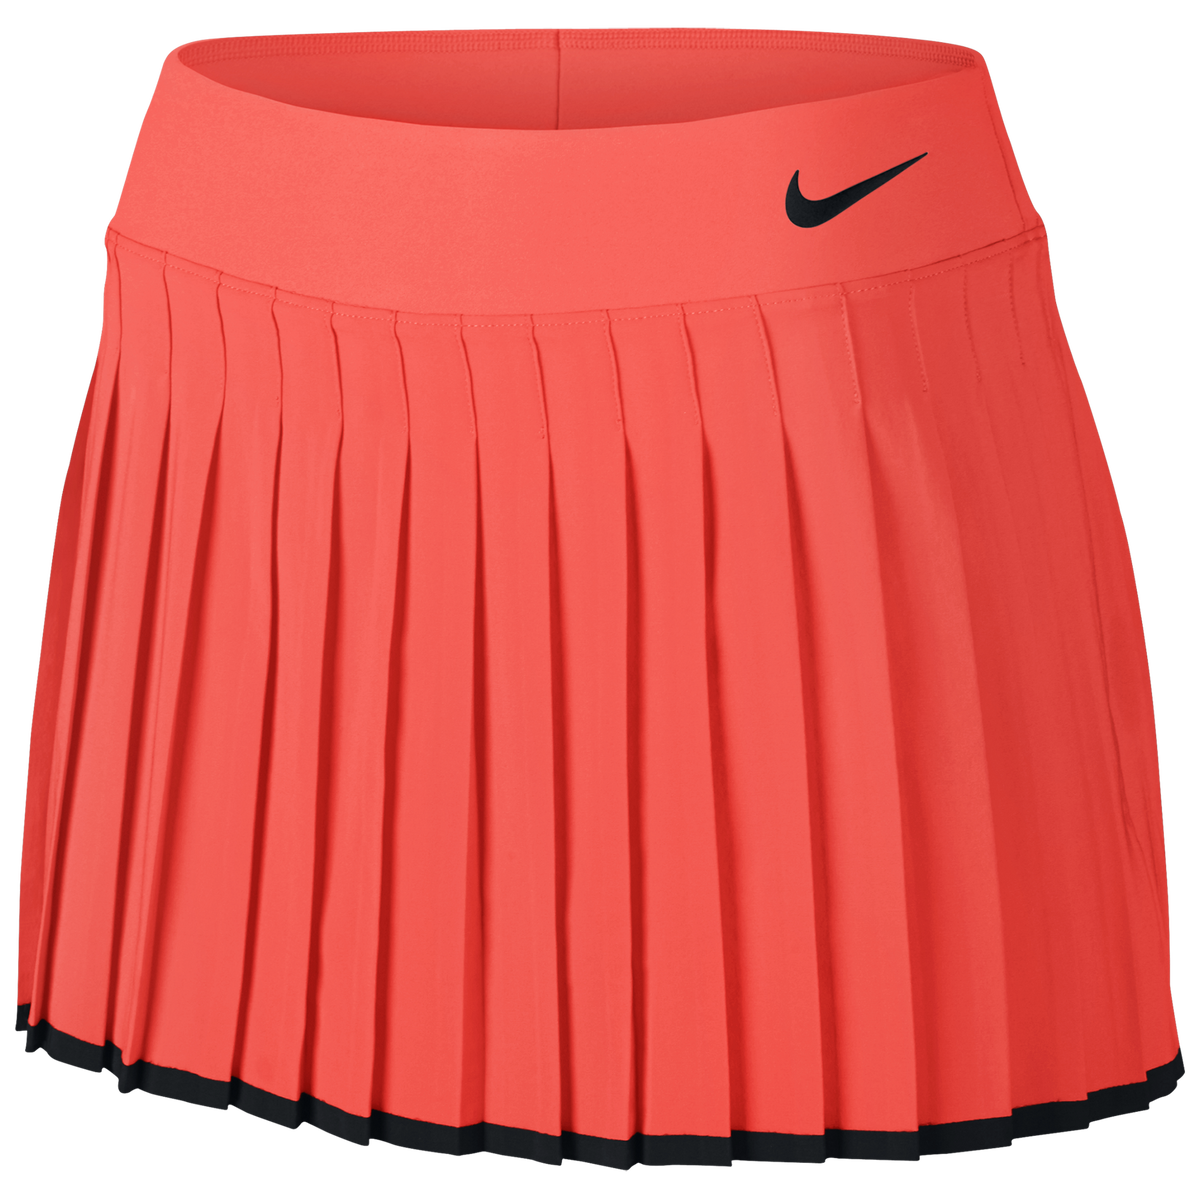 Nike Women's Victory Tennis Skirt TOUR Superstore